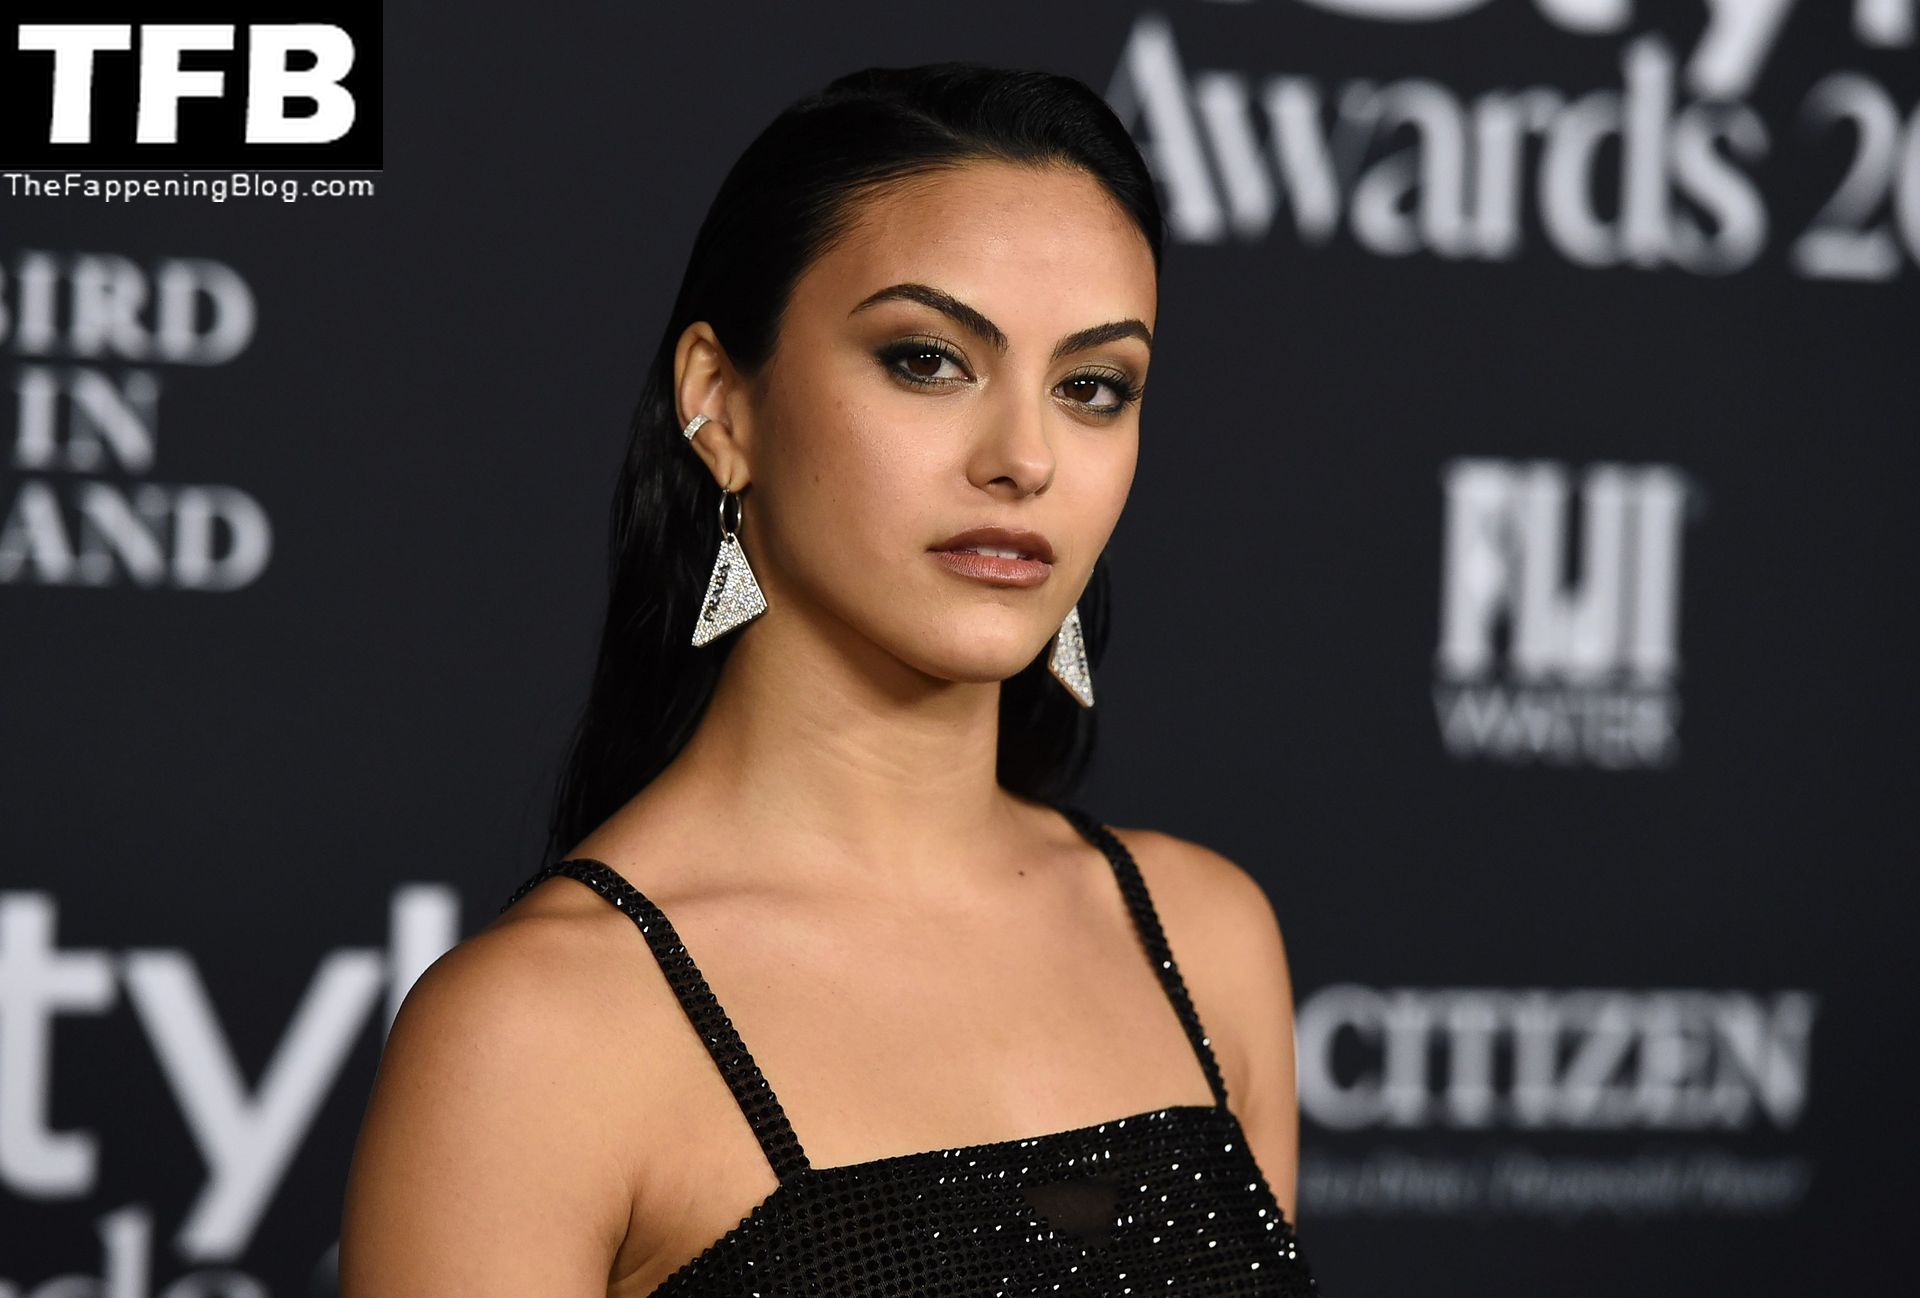 Camila-Mendes-See-Through-Tits-The-Fappening-Blog-75.jpg